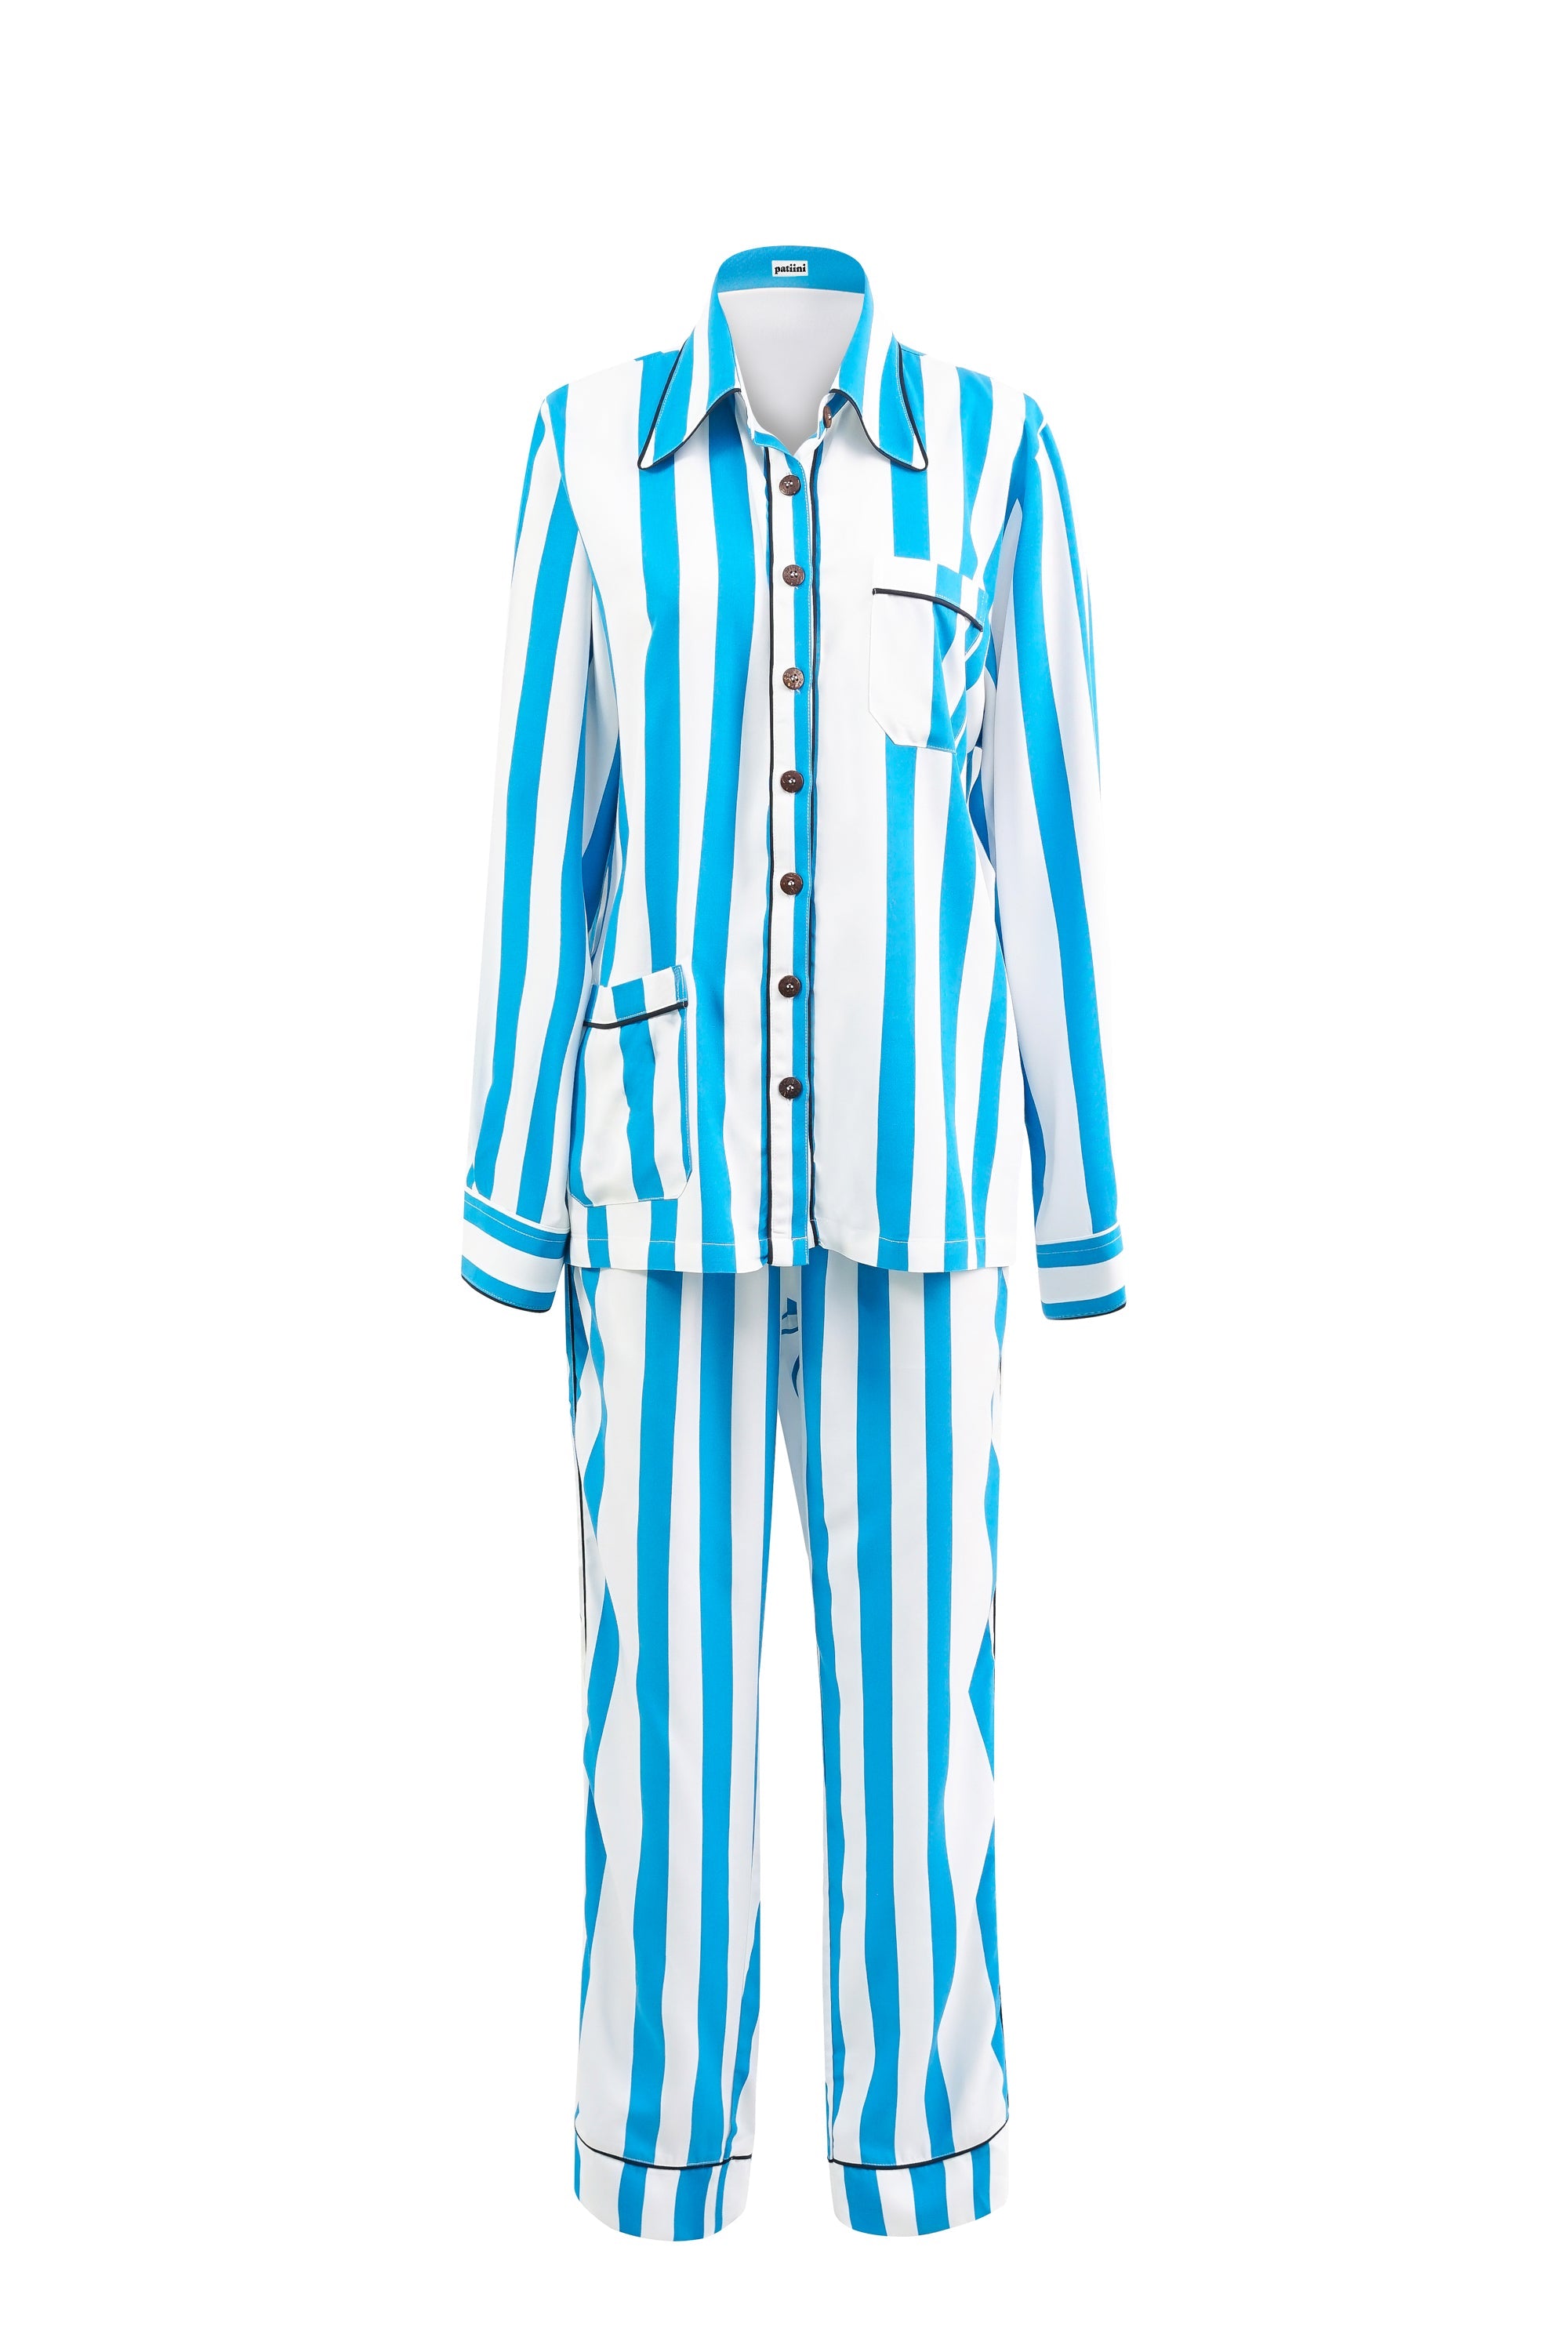 Blue and white striped long-sleeve pajama set with contrasting black piping.